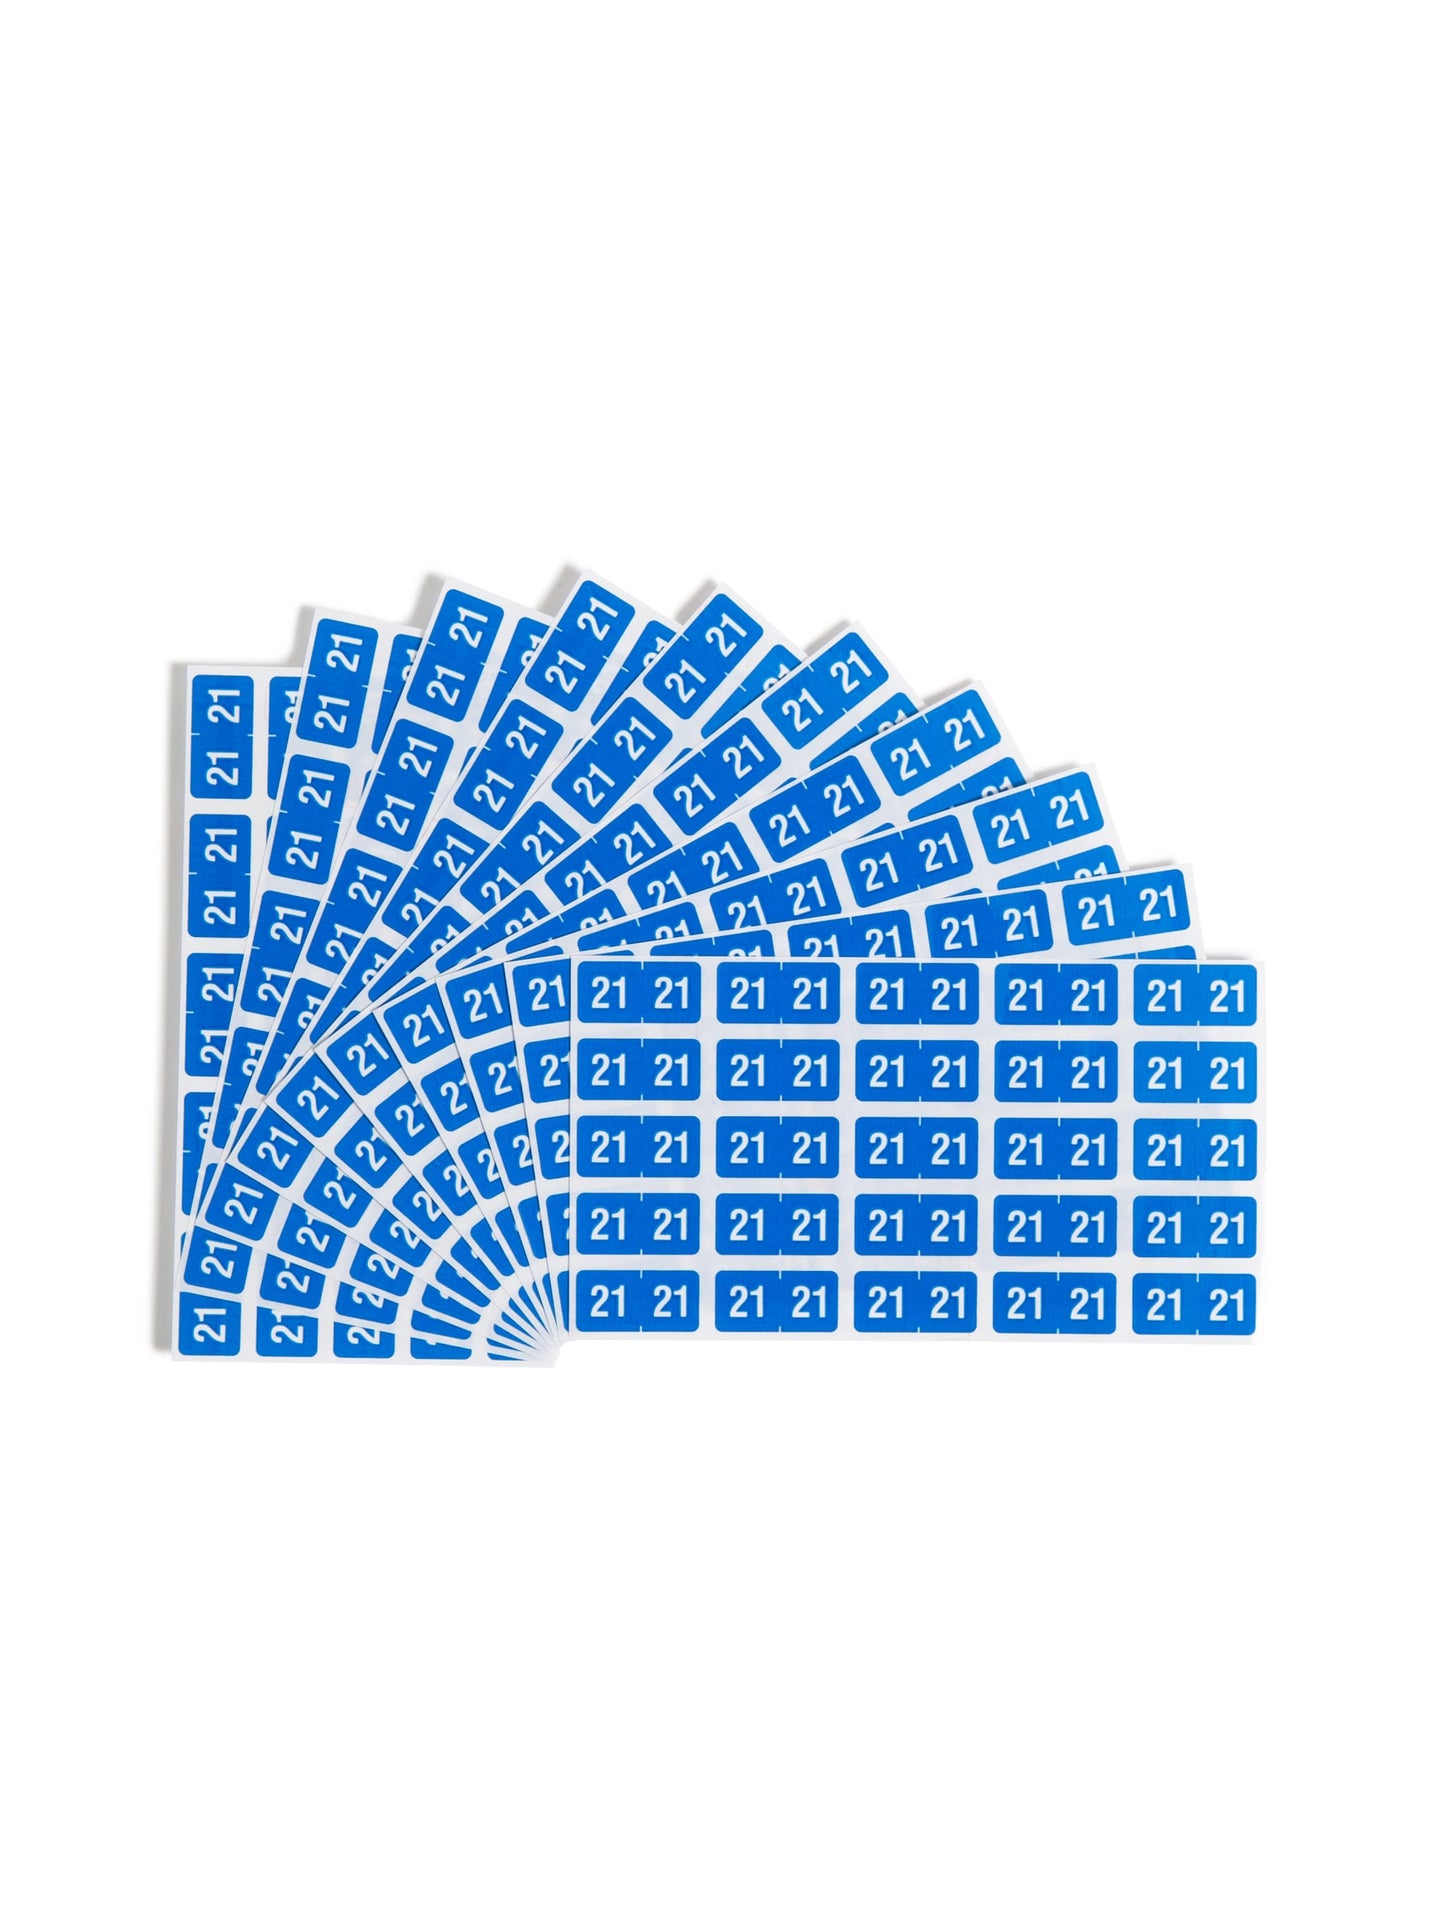 ETS Color-Coded Year Labels - Sheets, Light Blue Color, 1" X 1/2" Size, Set of 1, 086486679213